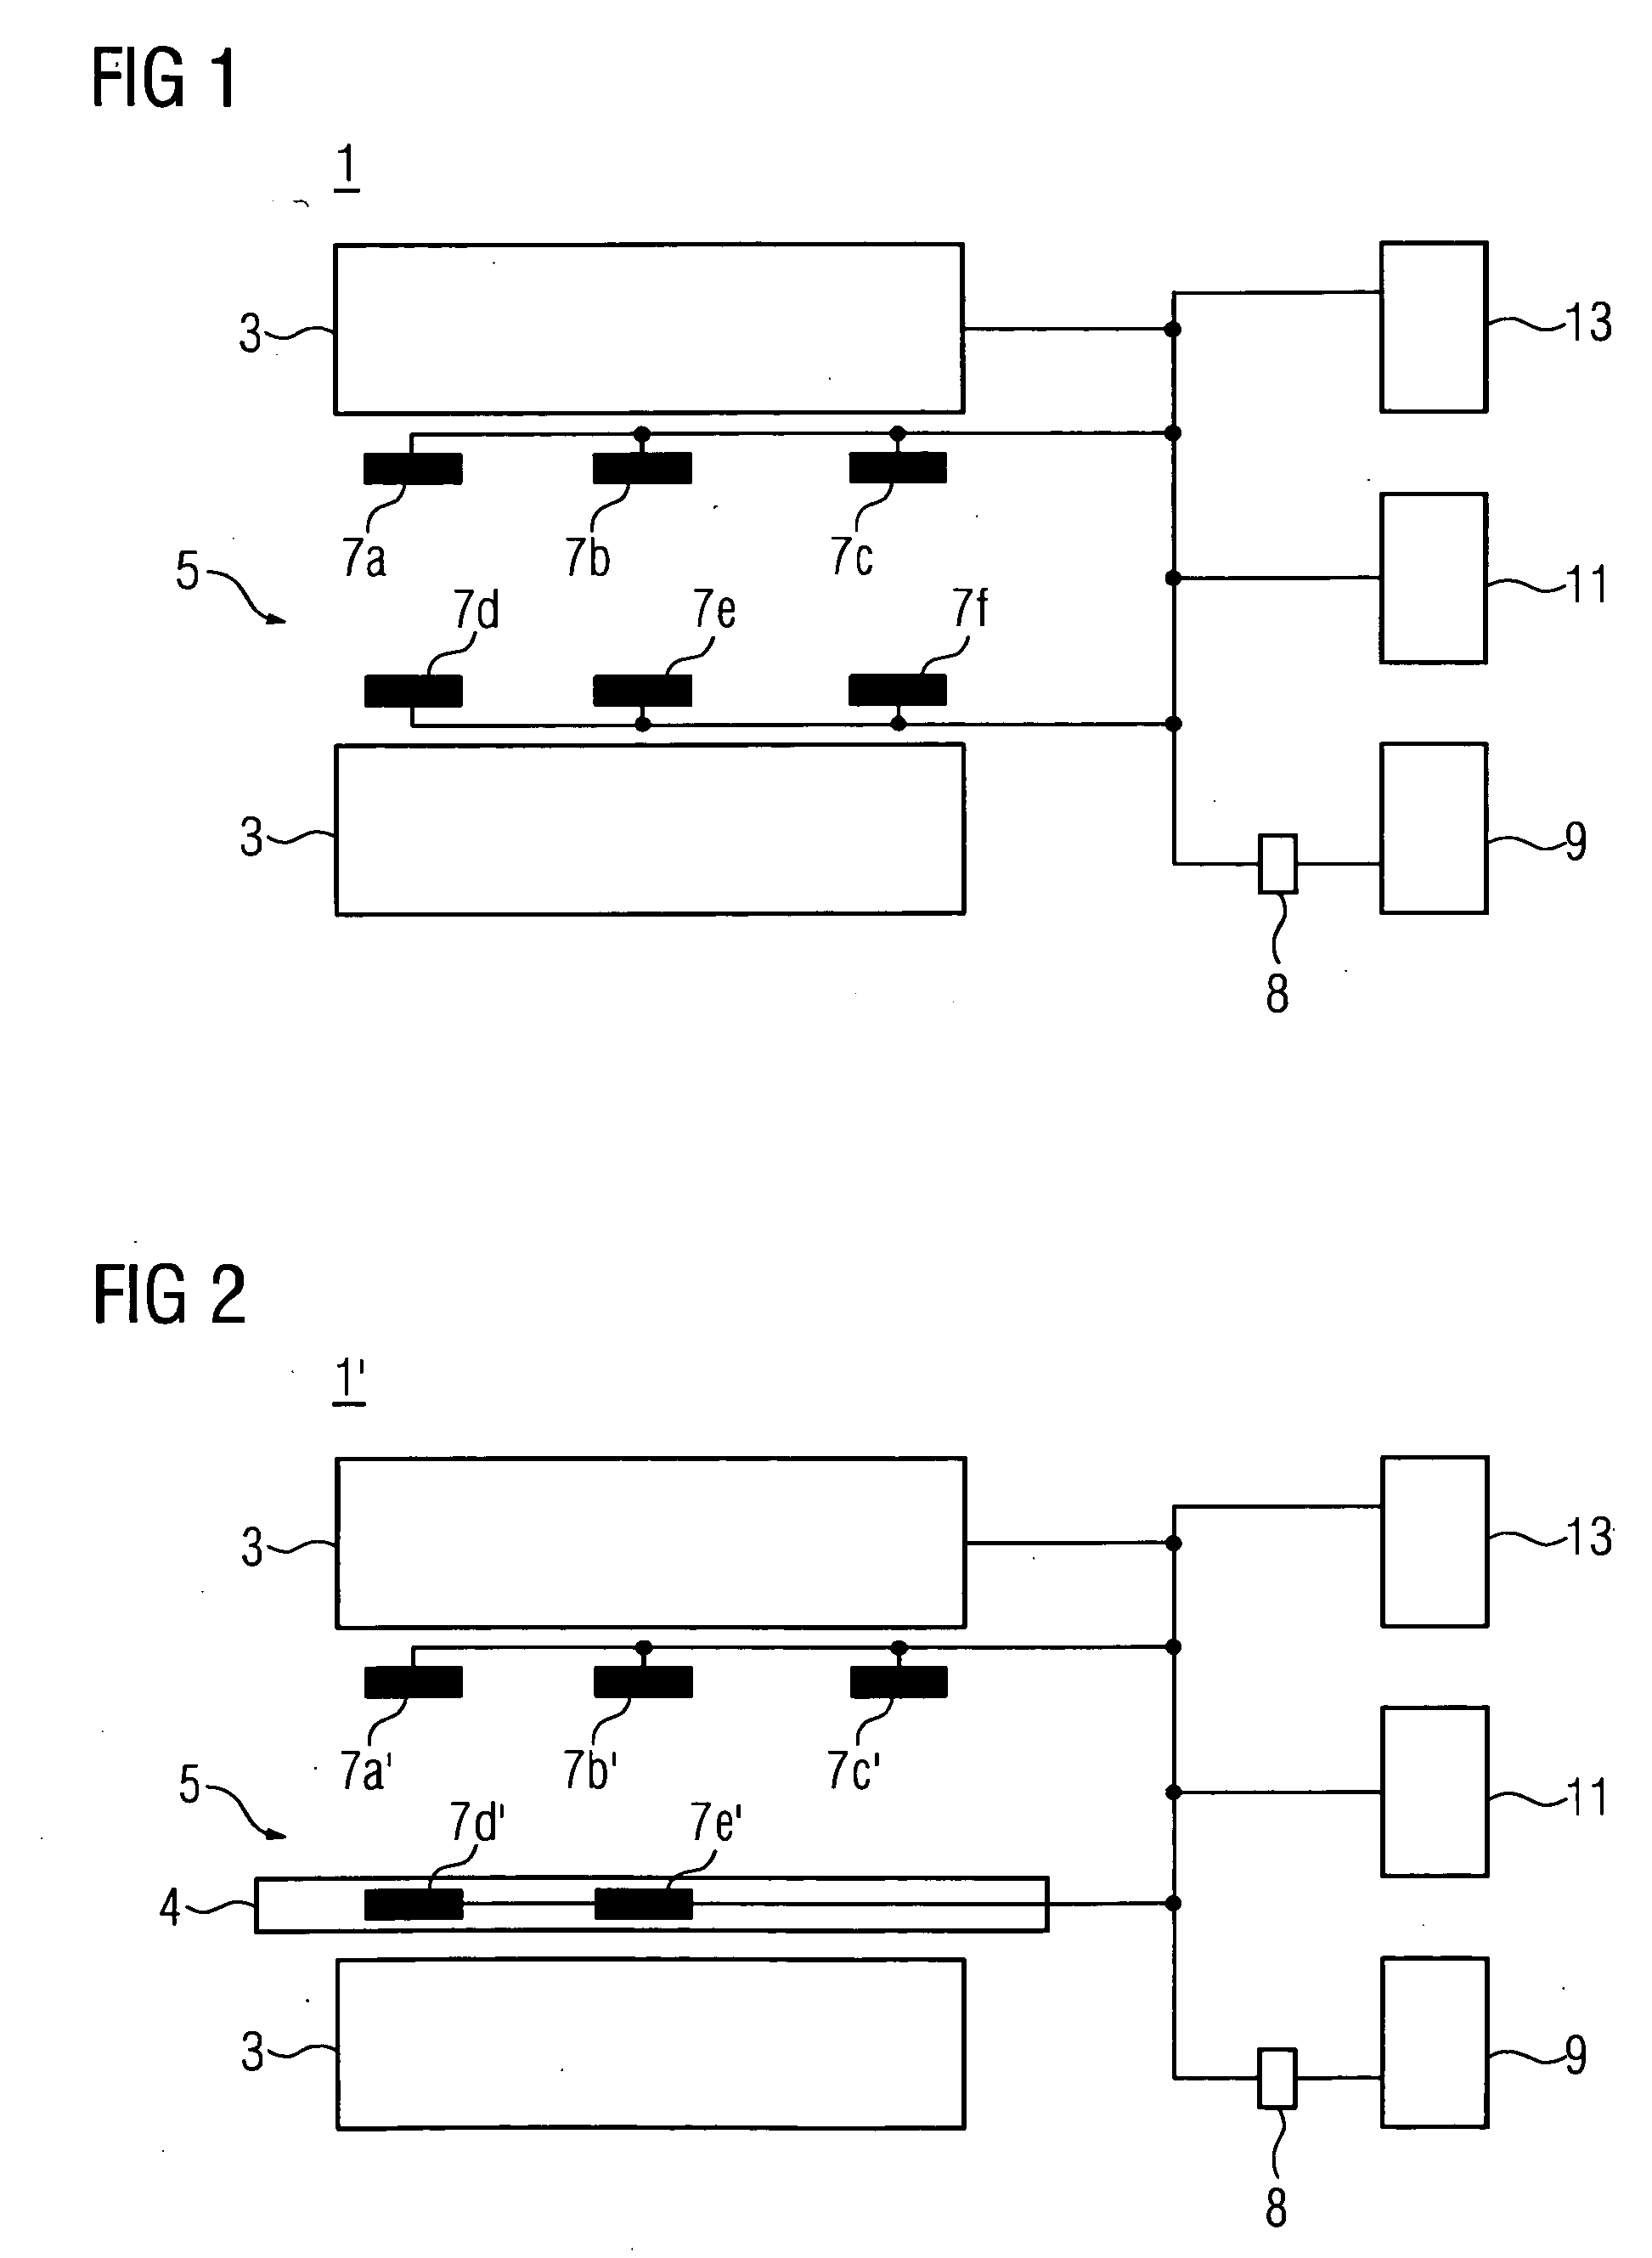 Medical unit and method for improving examination and treatment workflows